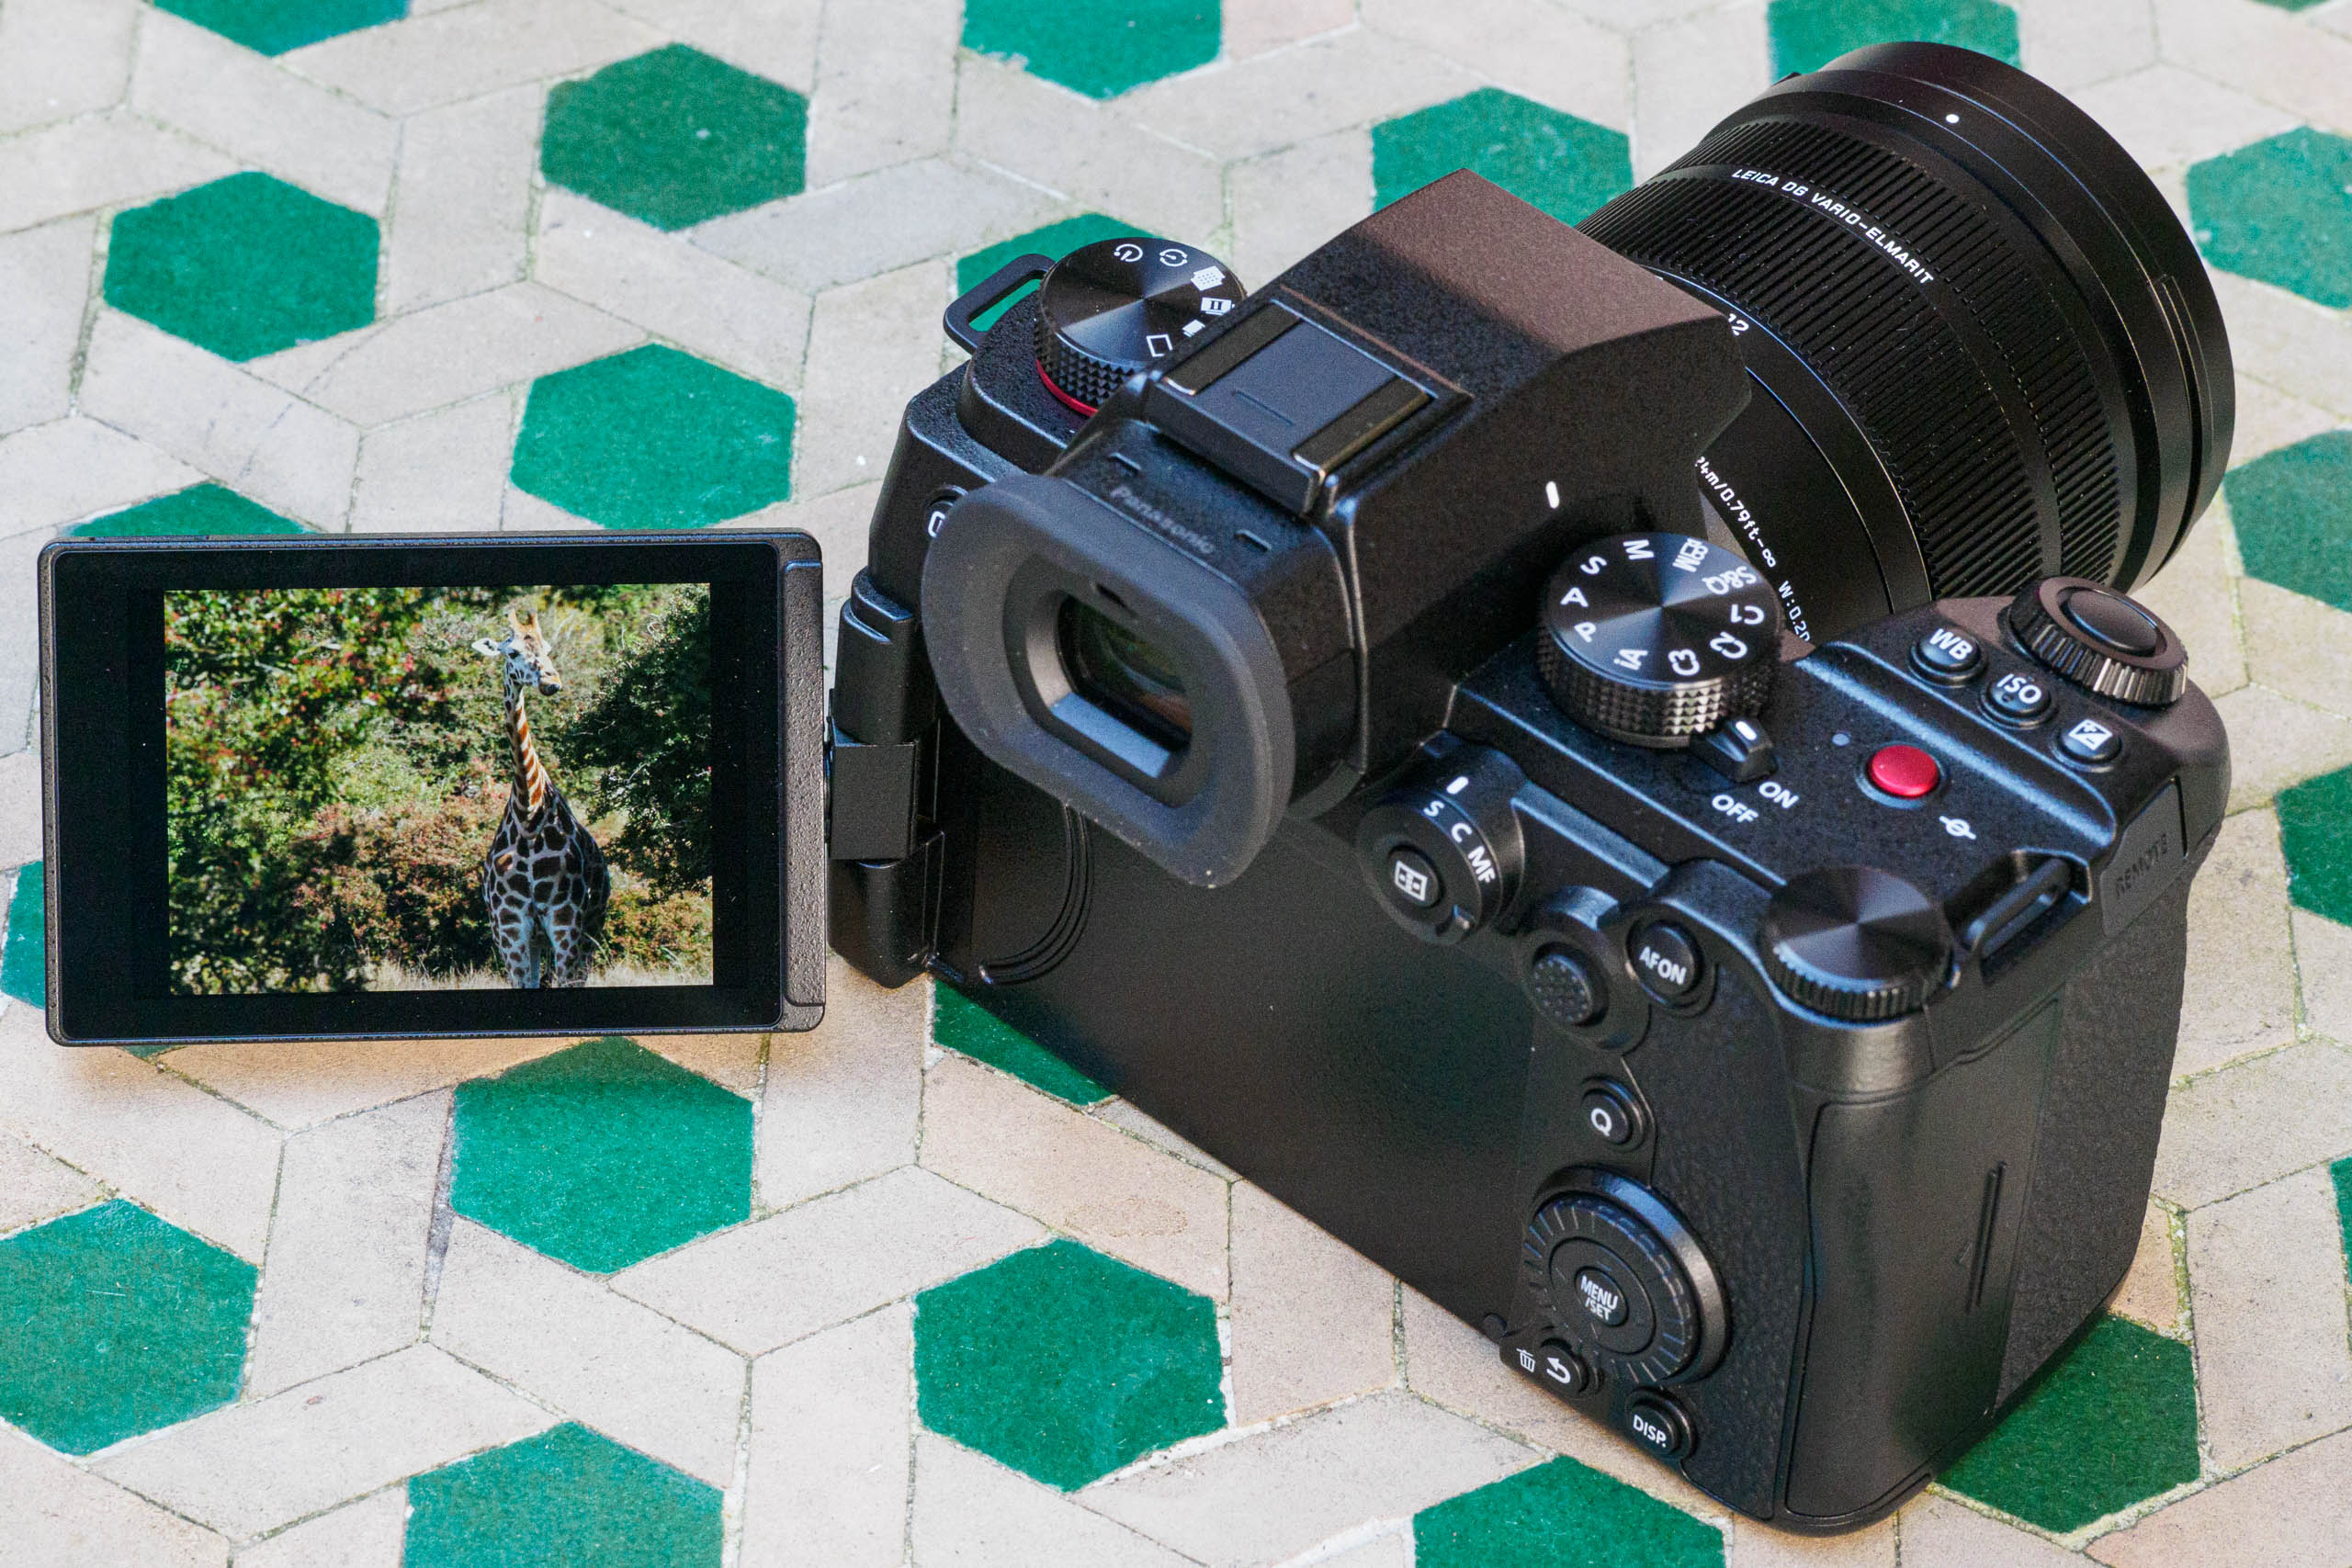 Panasonic Lumix G9 II review: the best Micro Four Thirds camera